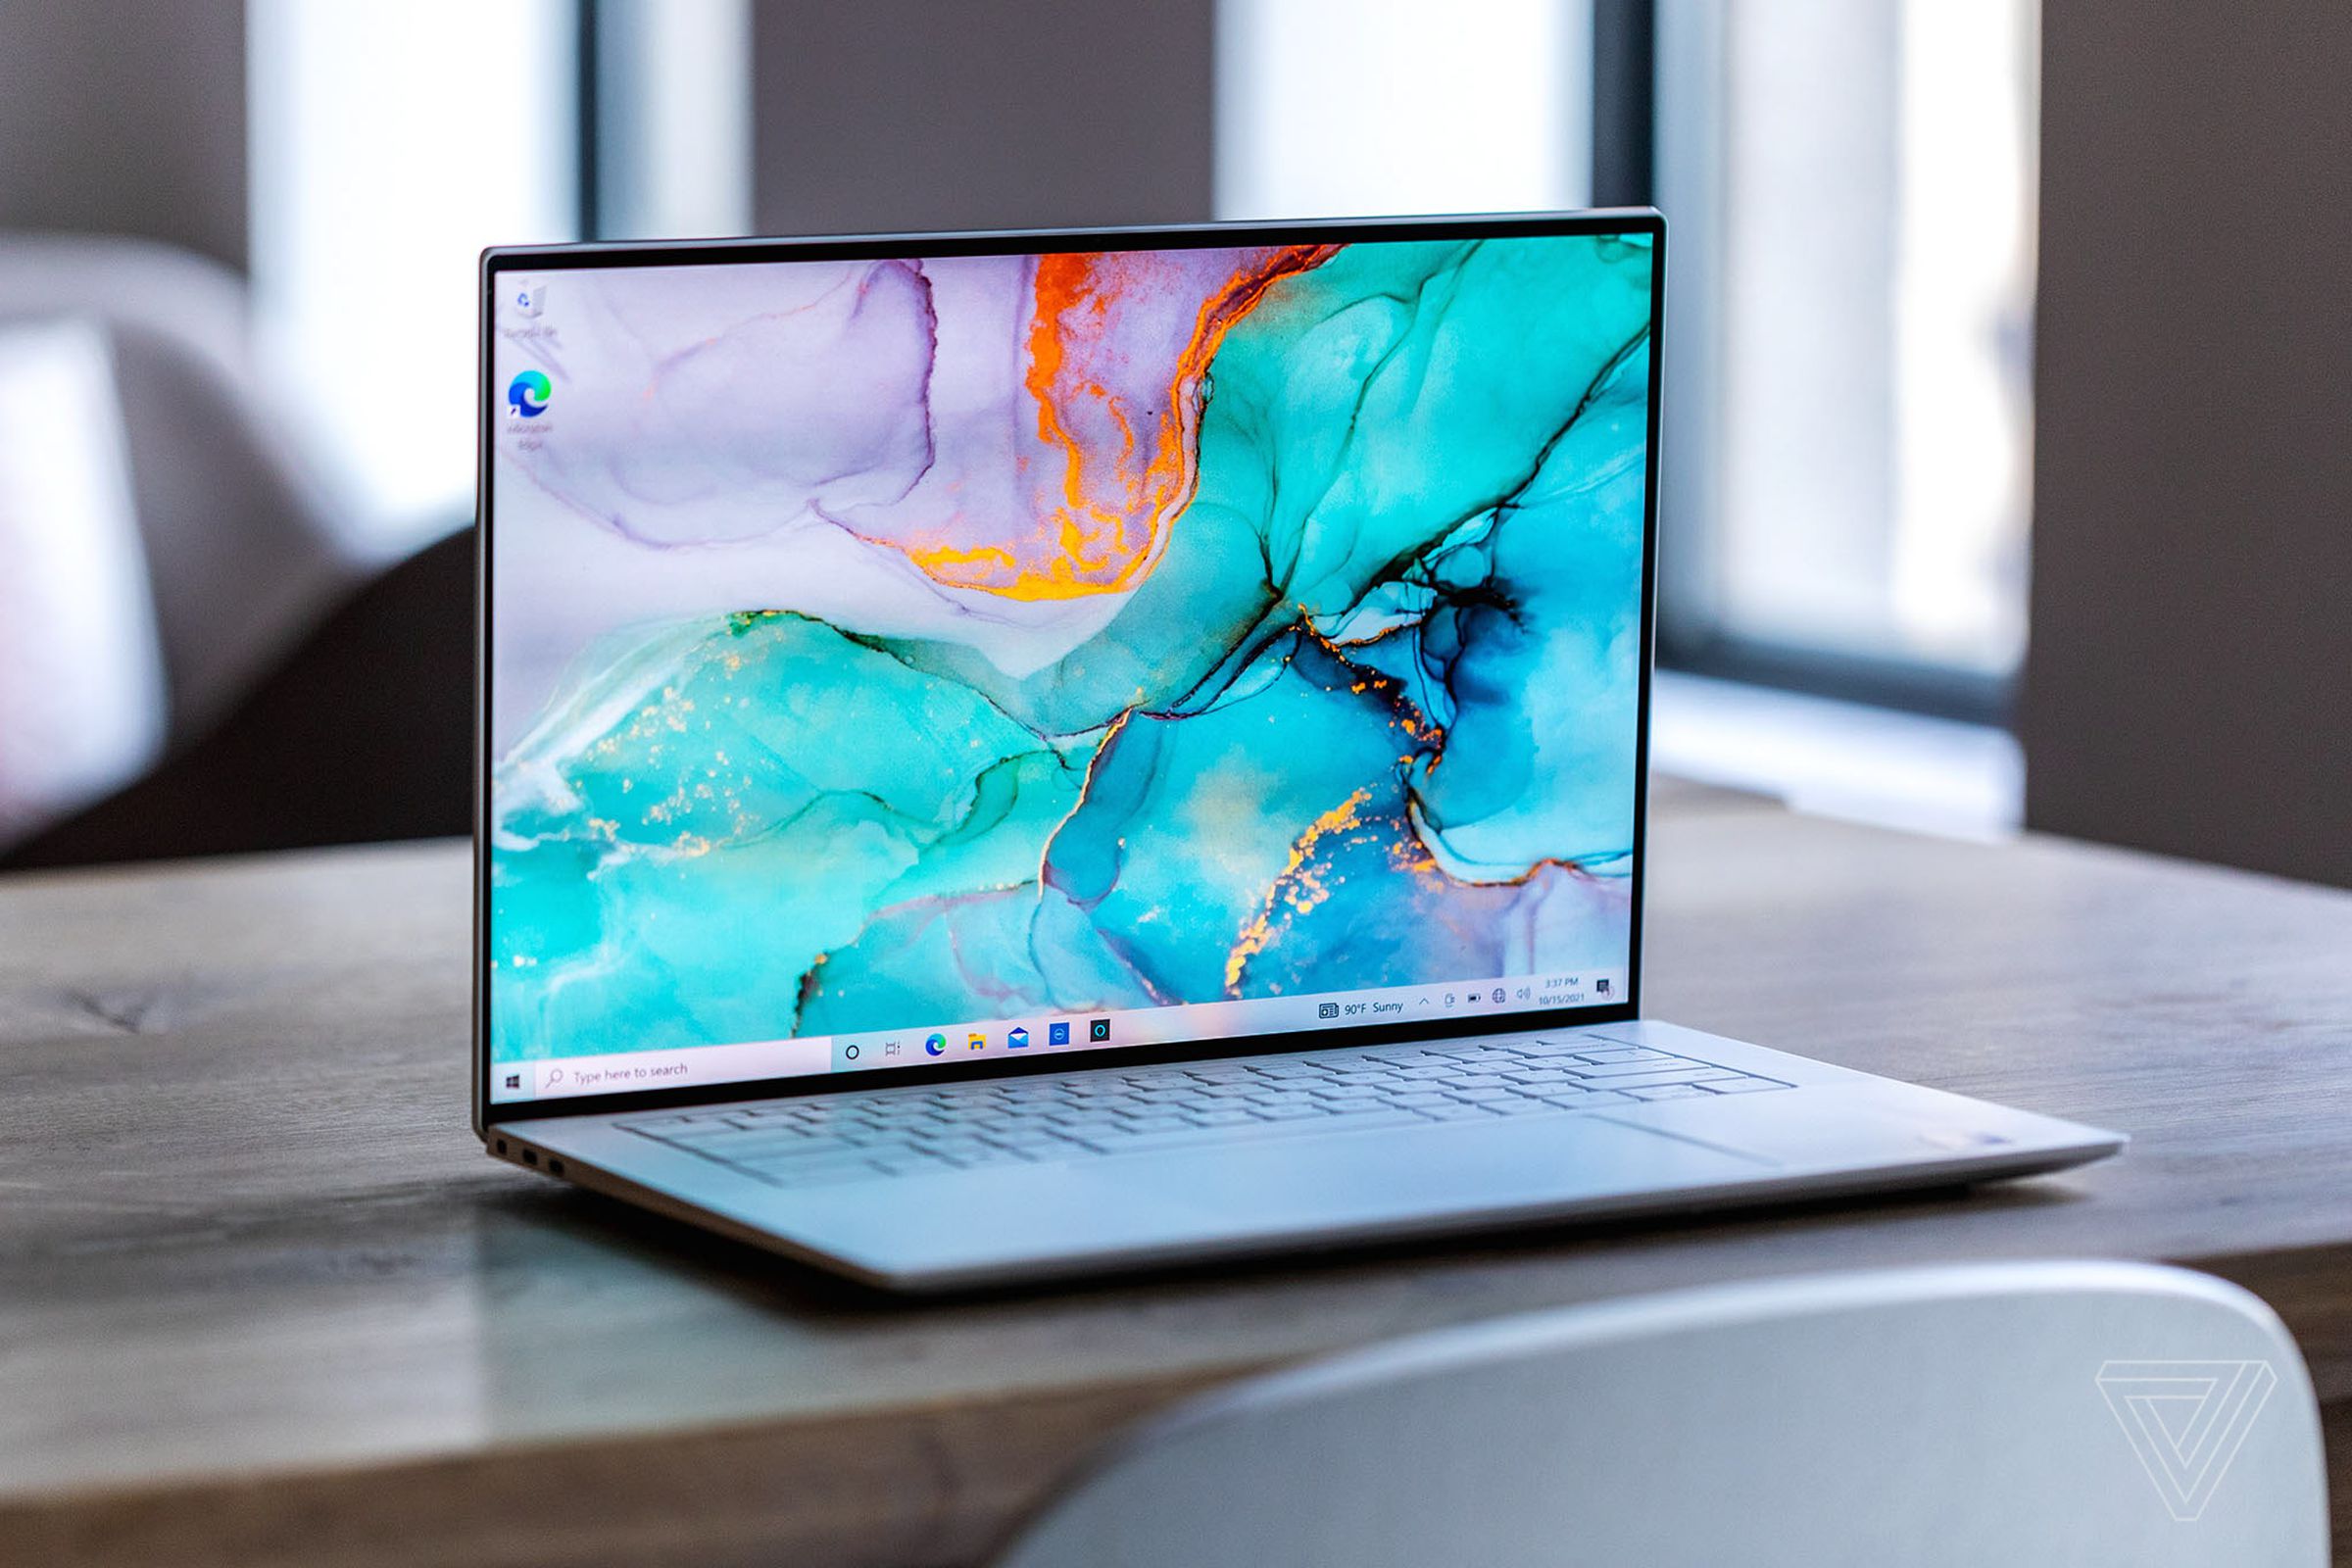 The Dell XPS 15 open on a wooden table. The screen displays a marbled blue and purple surface.